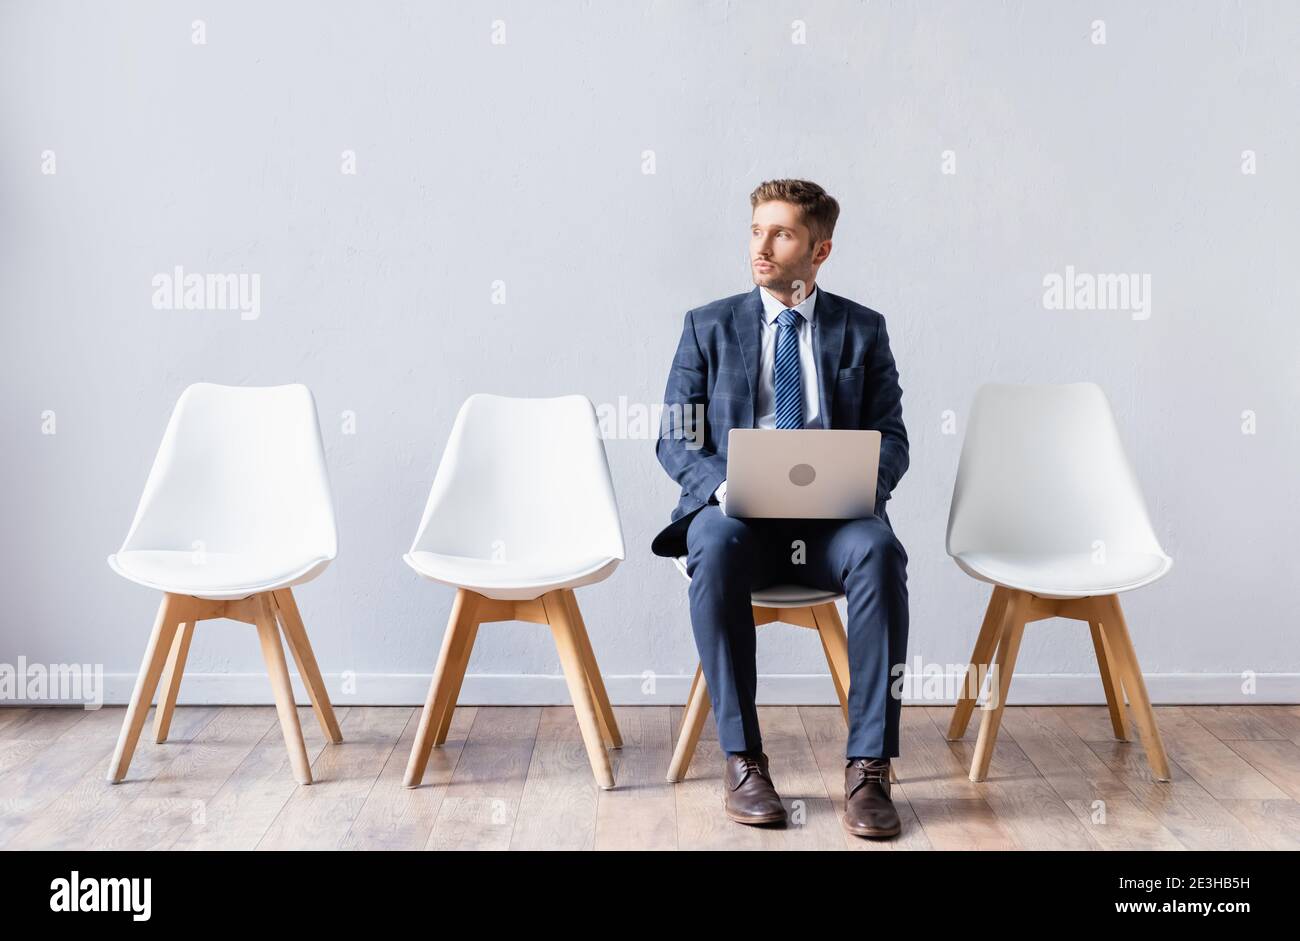 Businessman with laptop sitting on chair in hall Stock Photo